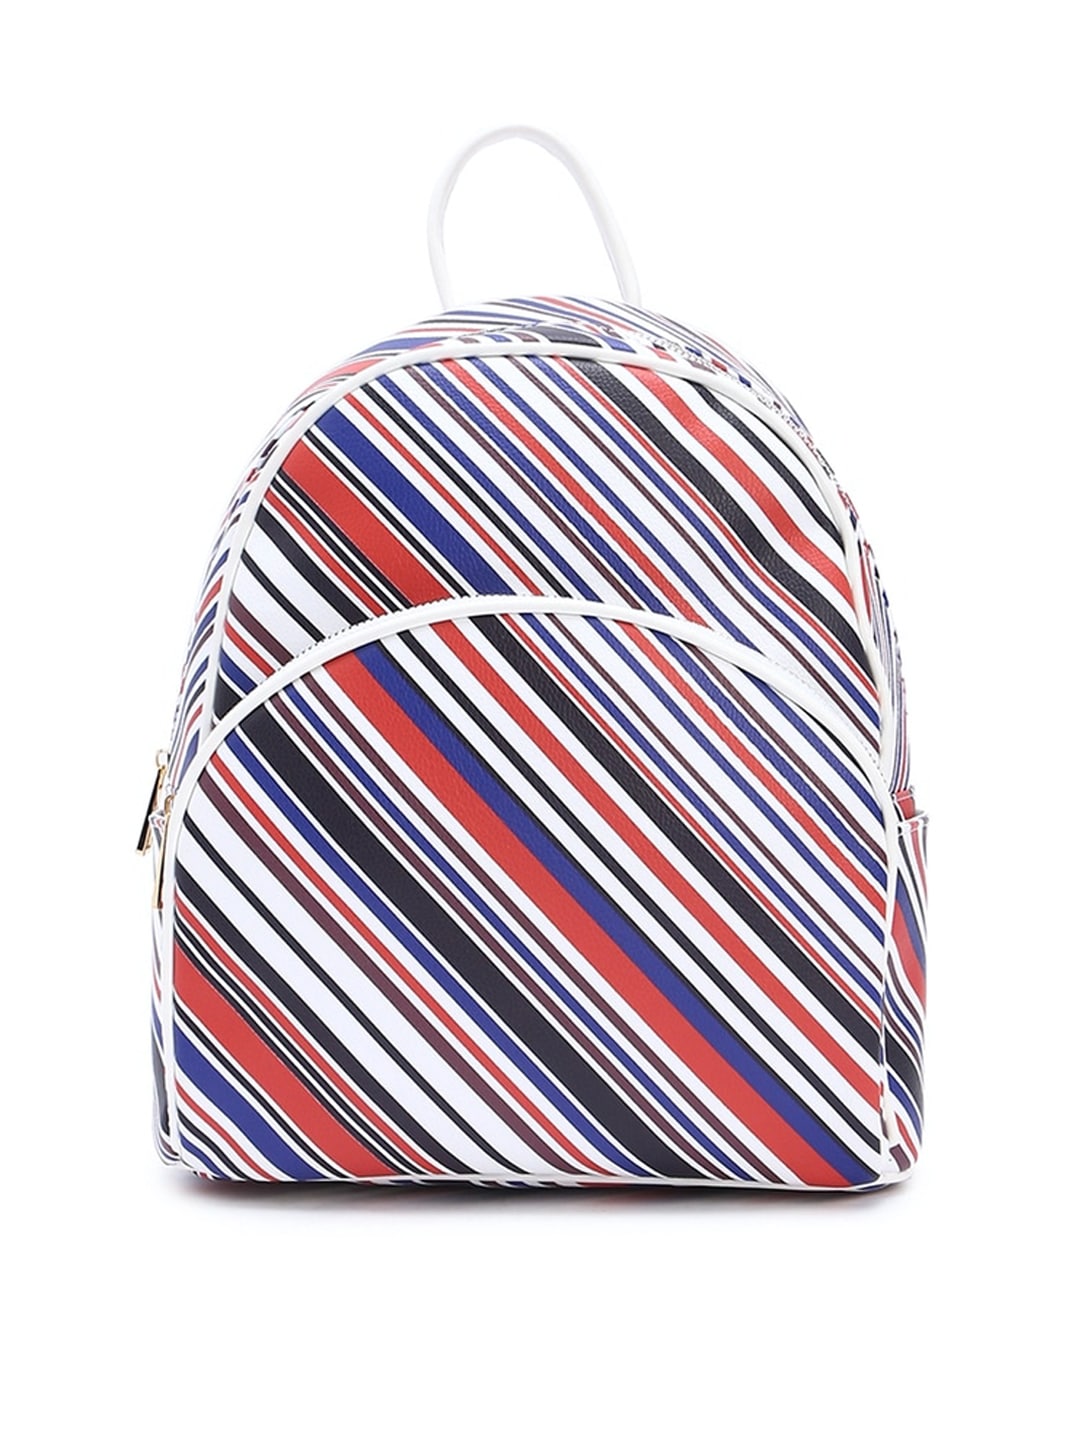 FOREVER 21 Blue Striped Bagpack Price in India